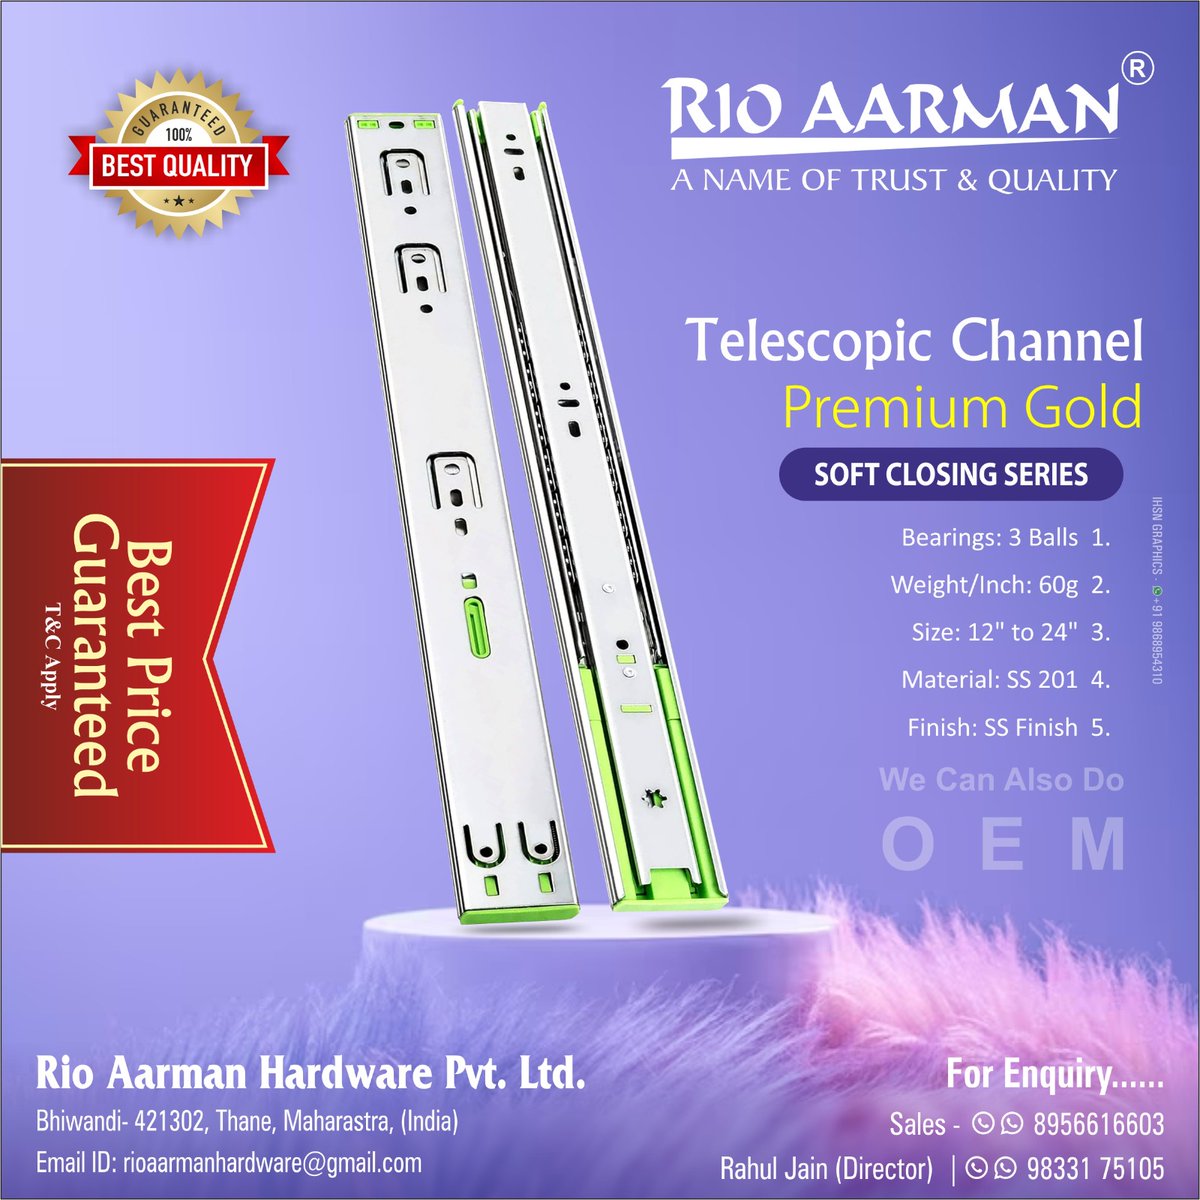 Expand your reach effortlessly with '𝐑𝐈𝐎 𝐀𝐀𝐑𝐌𝐀𝐍's telescopic channels: Precision in Motion.

#RioAarmanHardware #slimtandembox #channels #TelescopicSlides #DrawerSlides #TelescopingSlides #HeavyDutySlides #TelescopicDrawerSlides #BallBearingSlides #DrawerHardware #ihsn